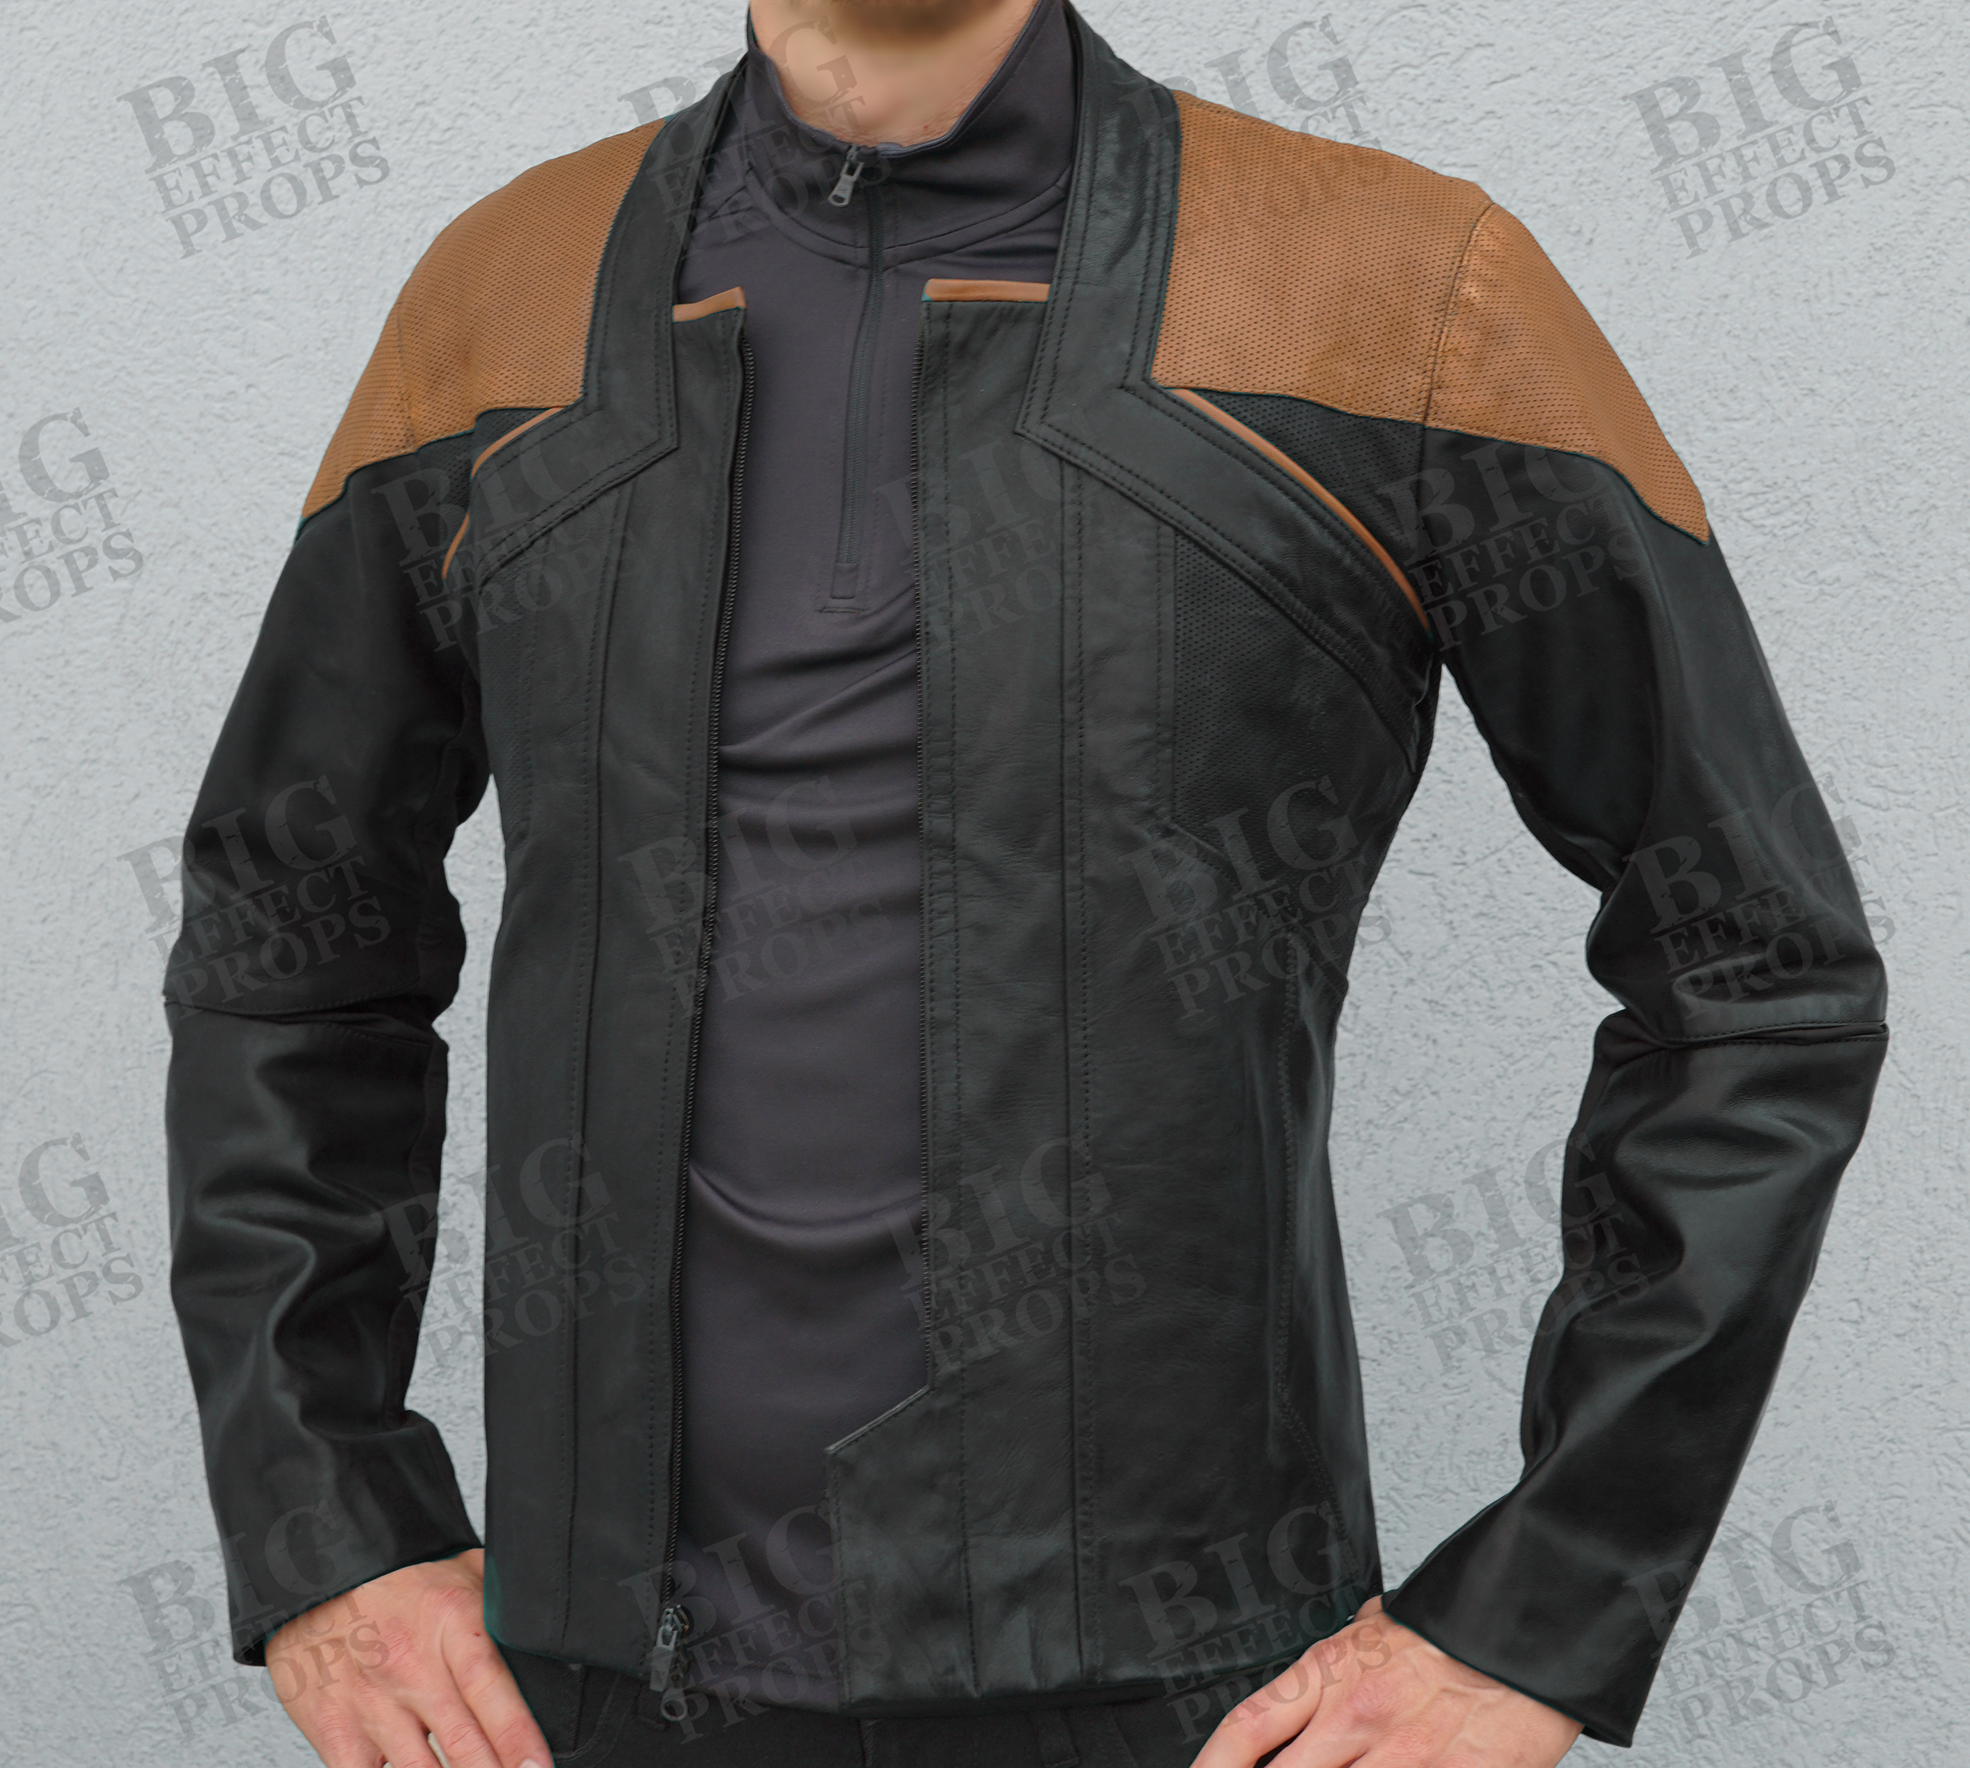 Unlimited Run - Star Trek: Picard, Away Jackets, Now Taking Orders! | RPF  Costume and Prop Maker Community